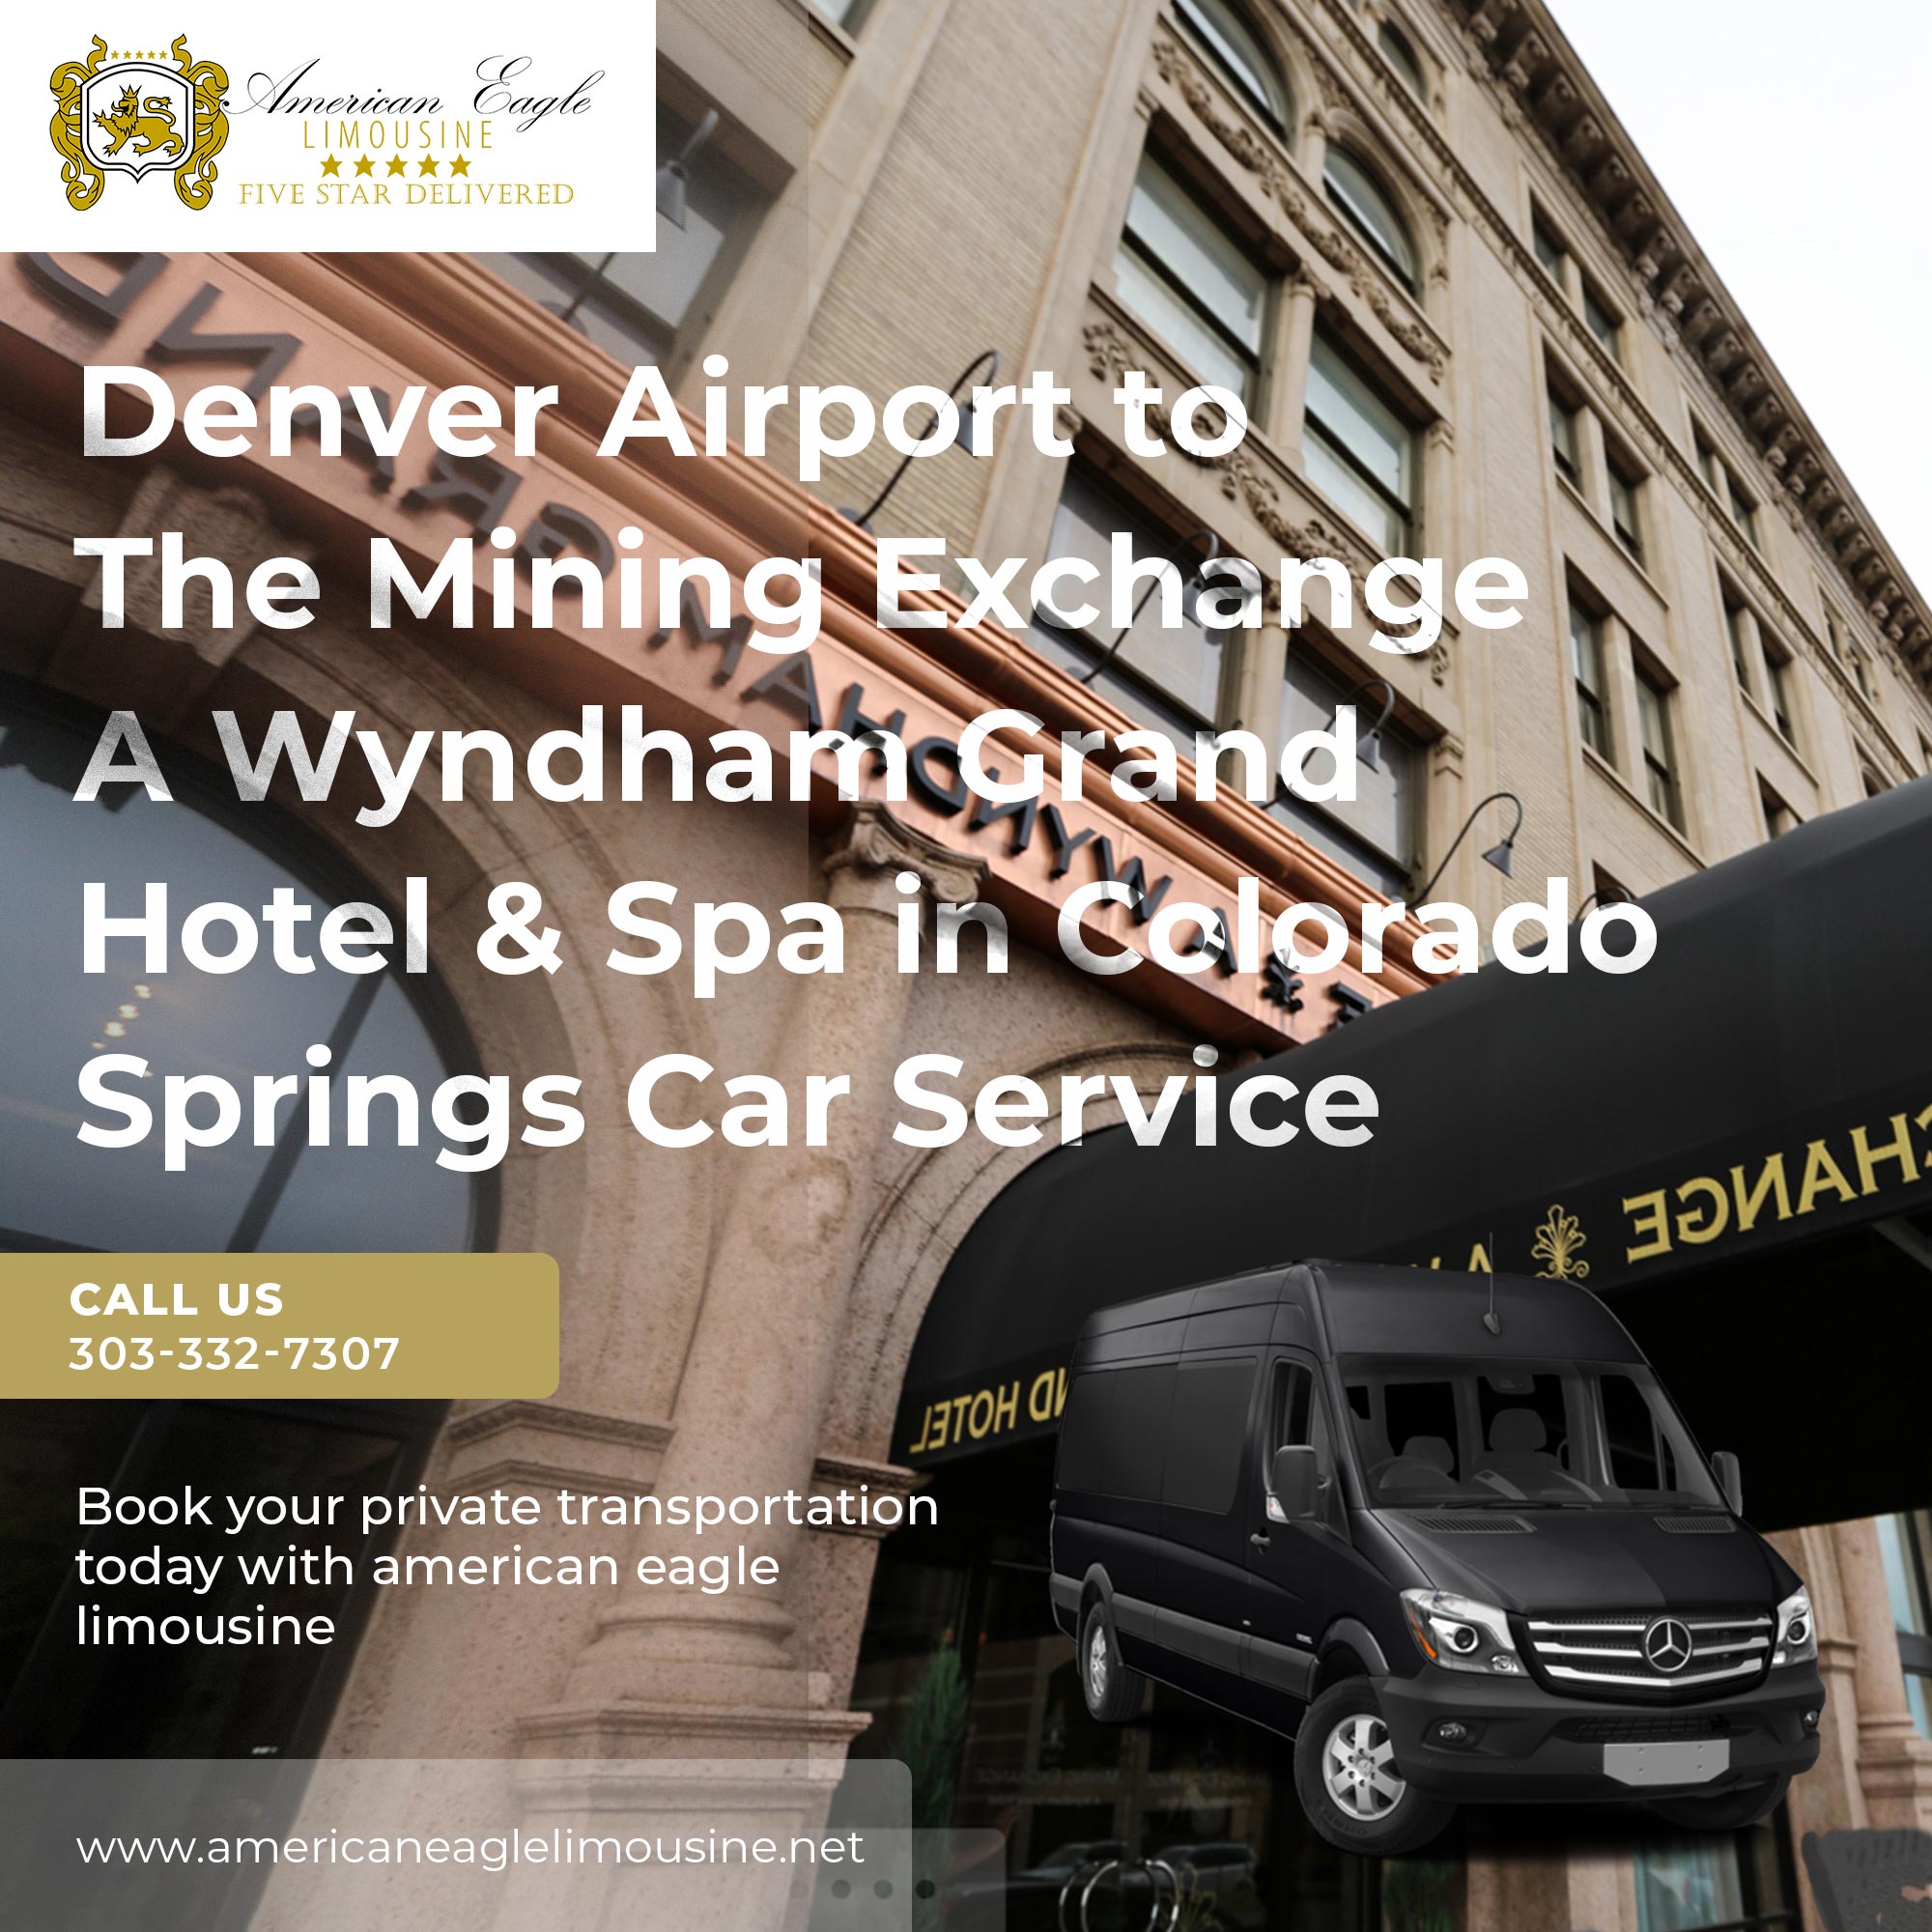 You are currently viewing The cheapest way to get from Denver Airport (DEN) to the mining exchange a wyndham grand hotel & spa in Colorado springs Private Shuttle.